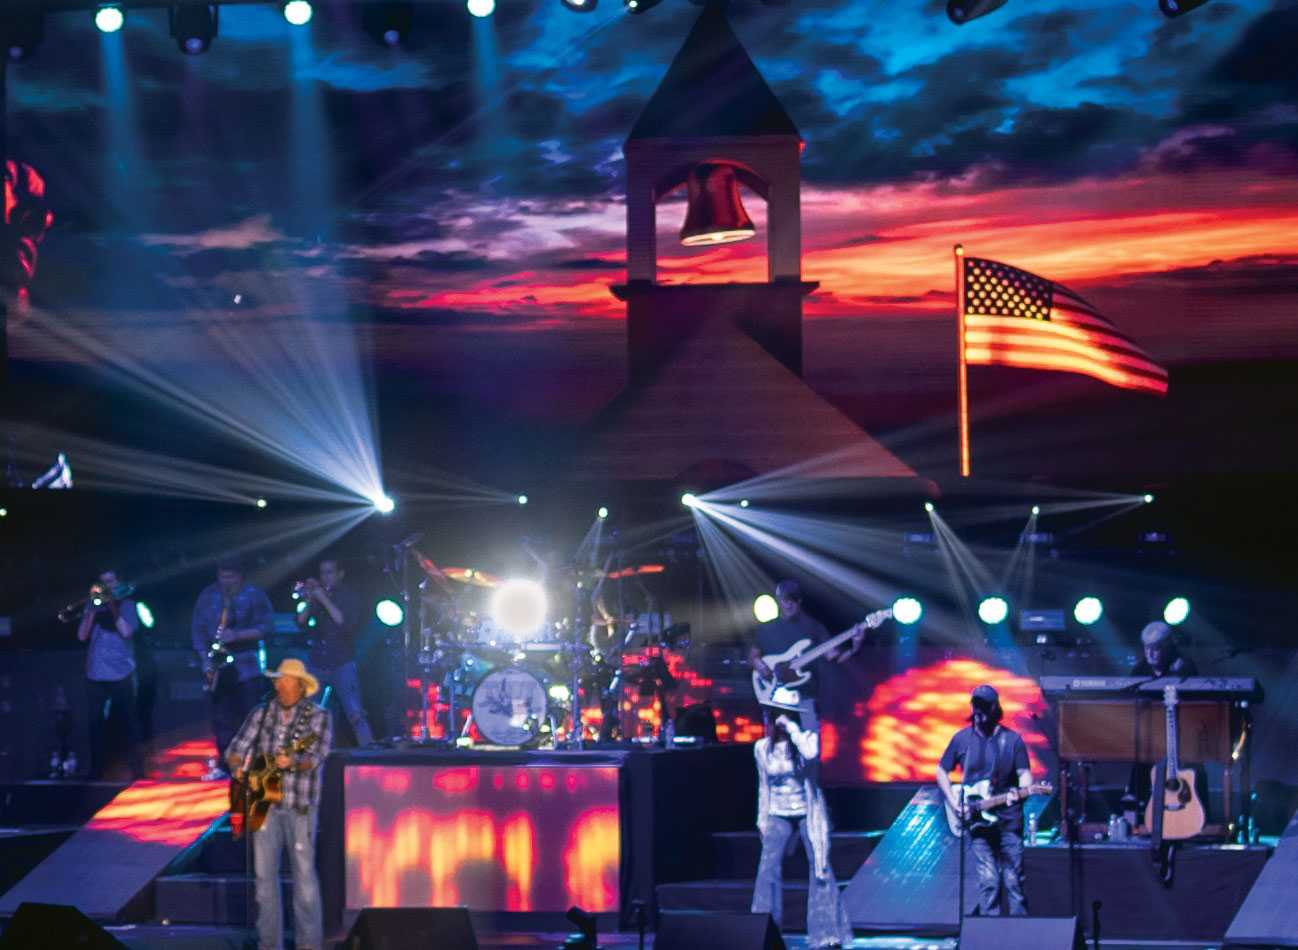 Toby Keith’s tour kicked off at the Denny Sanford Premier Centre in Sioux Falls